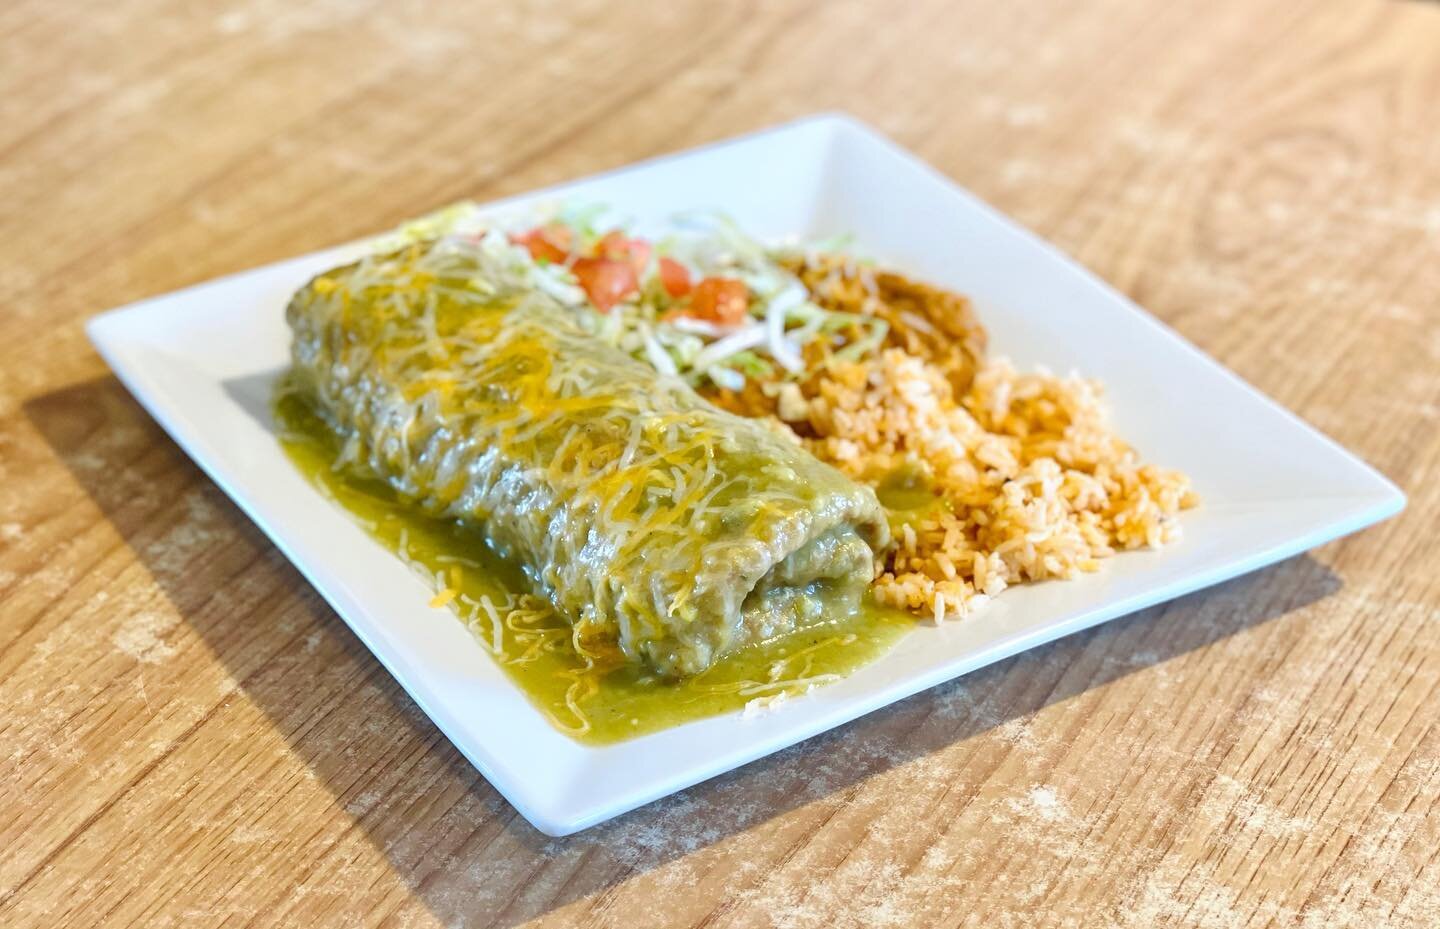 Our chimichanga is a MUST TRY!!
Top it off with our delicious salsa verde!! 🤤 
Dine-in or takeout available!!
Call us at (520)748-1032!! 
*chimichangas do not come with rice and beans*